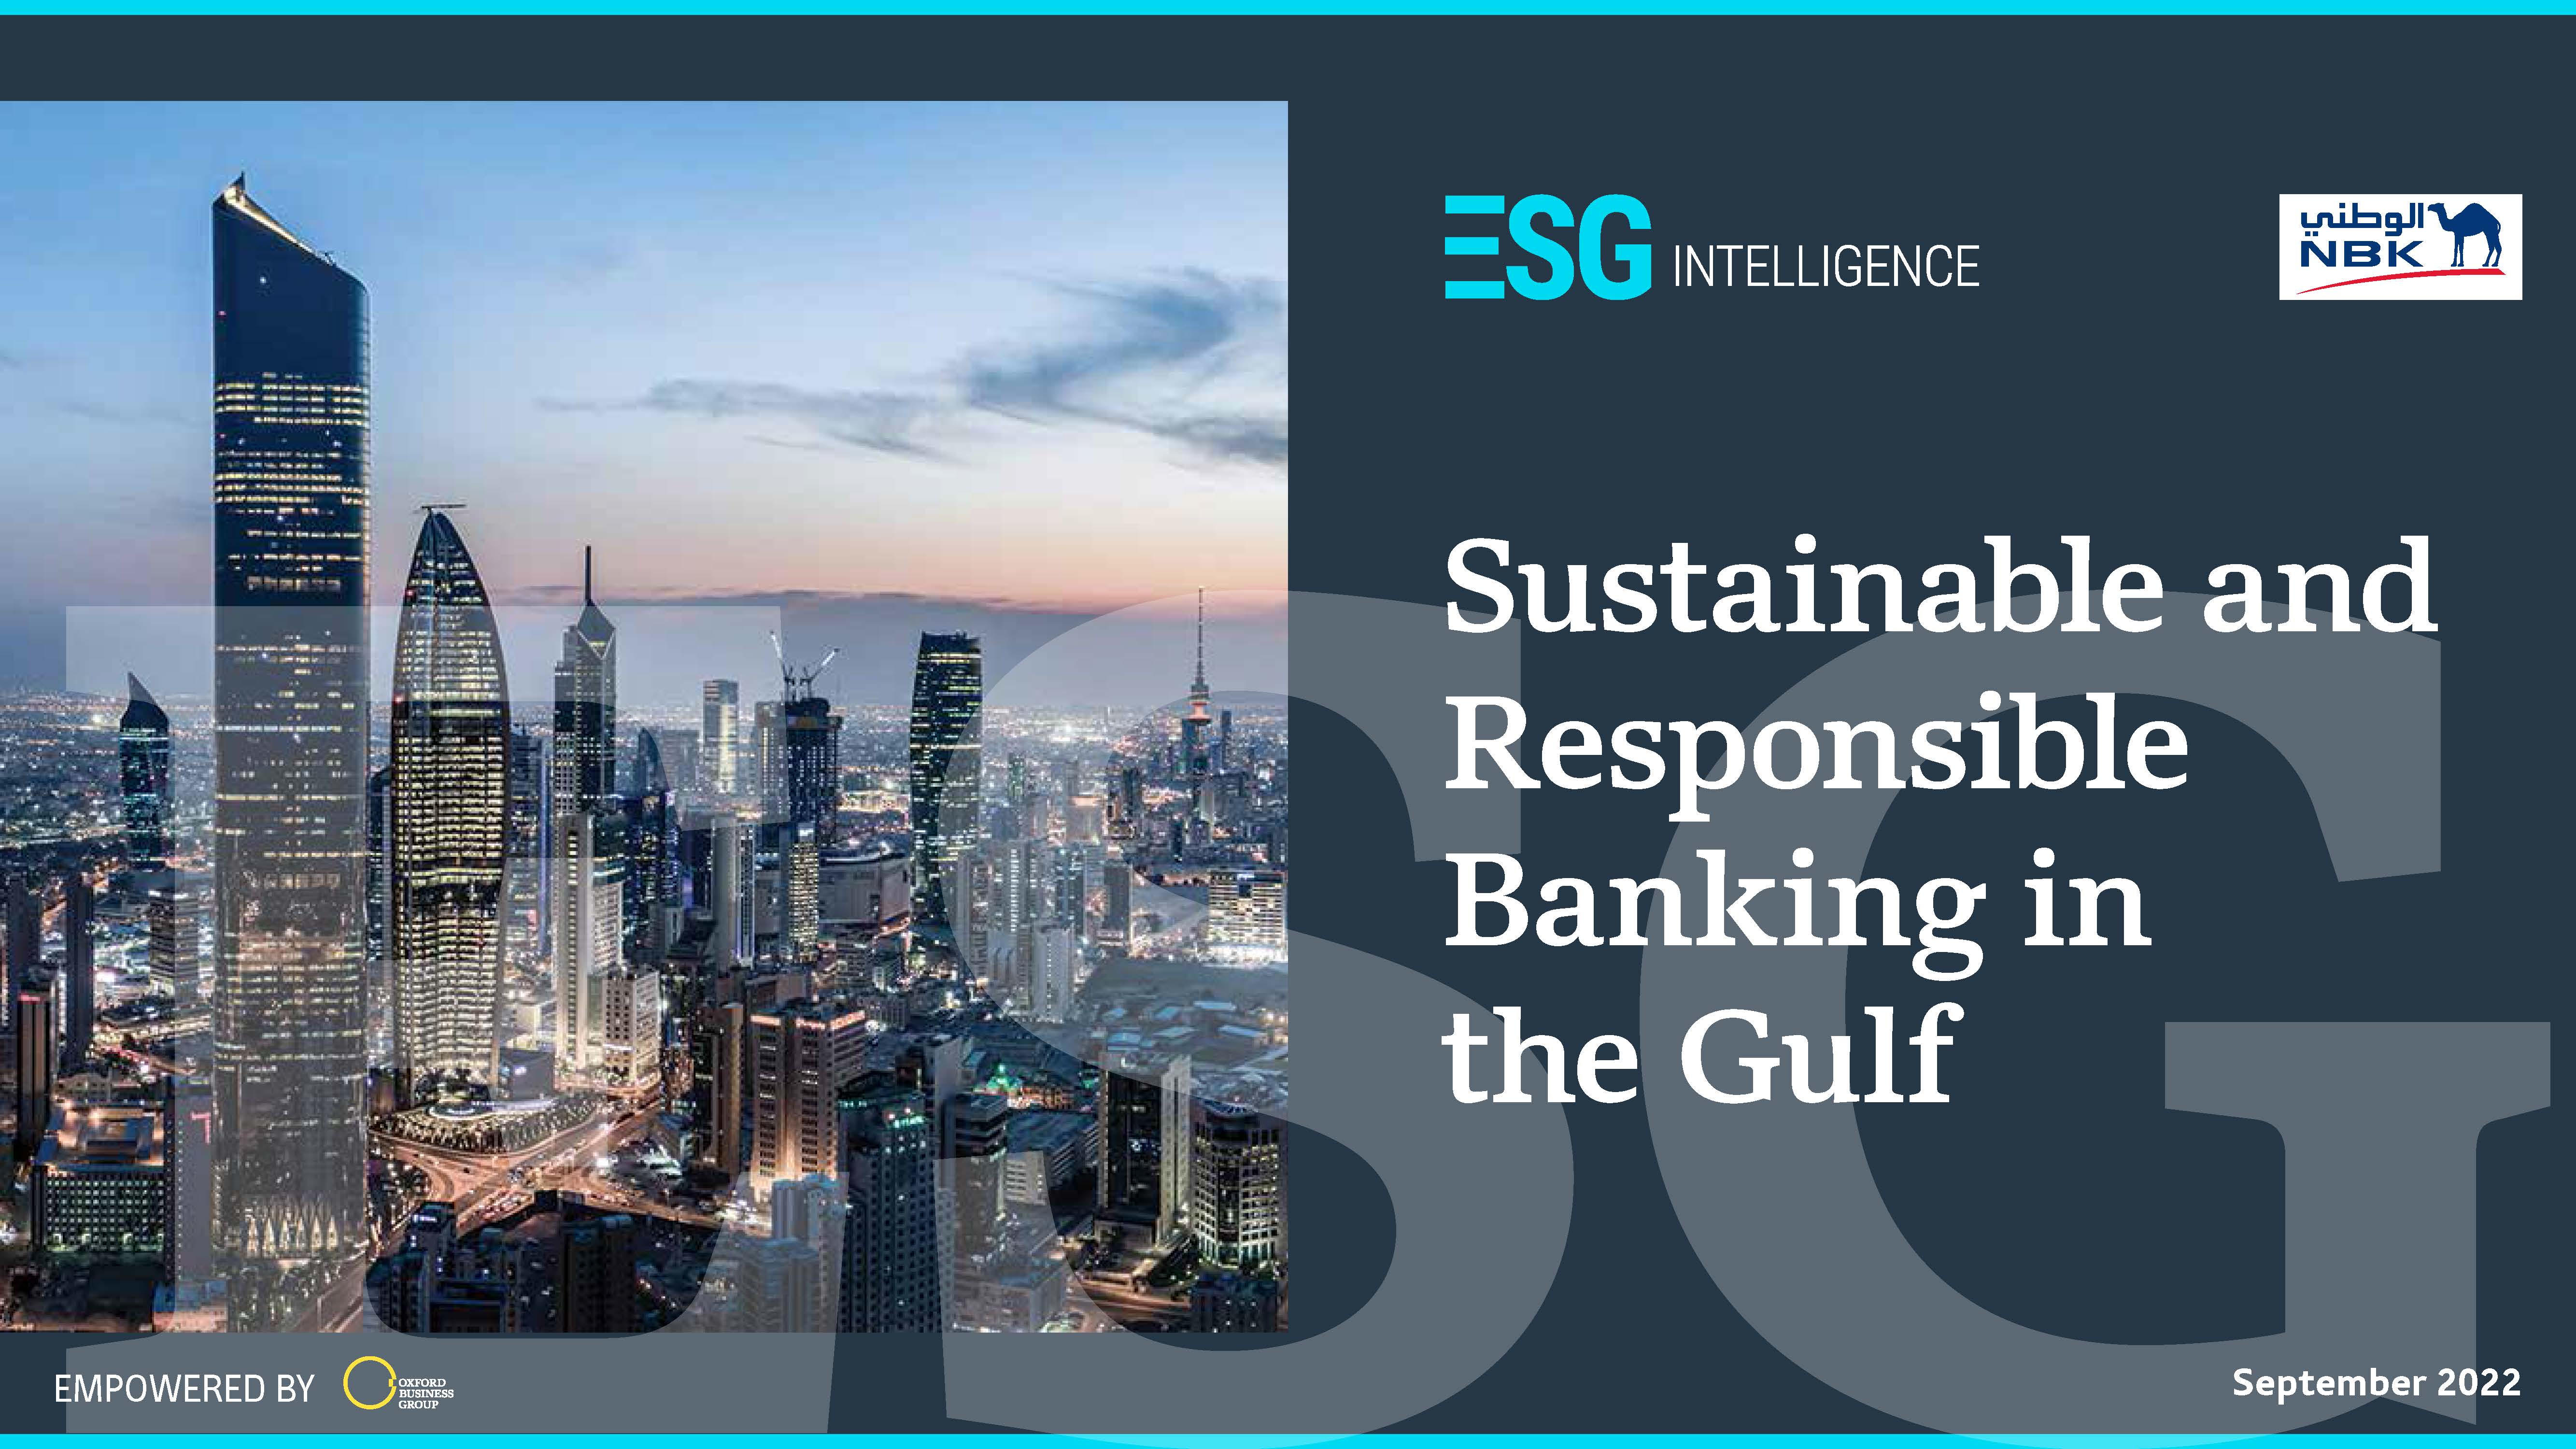 NEW ESG INTELLIGENCE REPORT CHARTS GROWING ROLE OF SUSTAINABLE FINANCE IN THE GULF